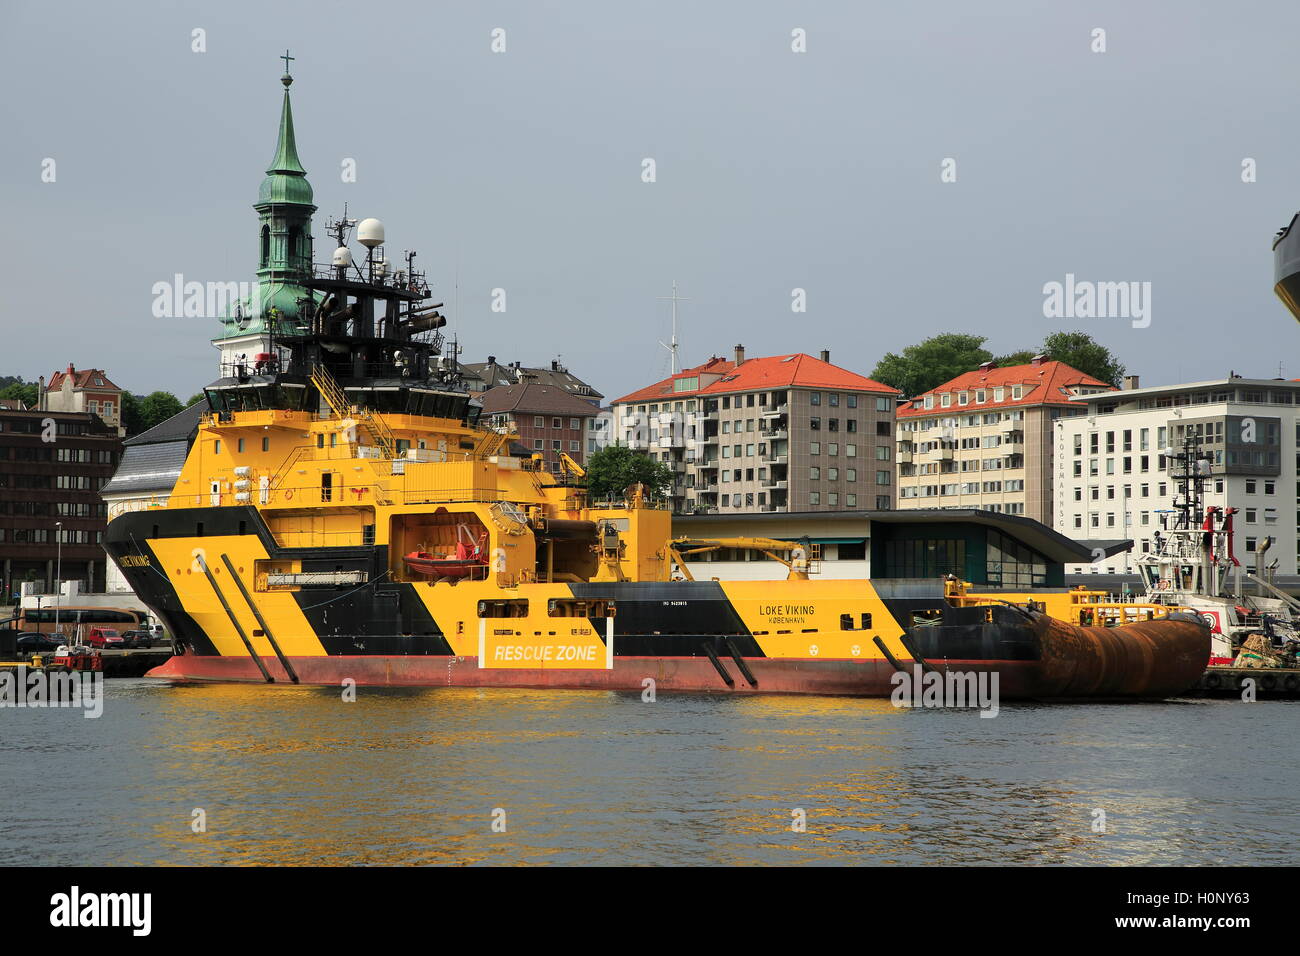 Loke Viking tug supply vessel ship in the harbour, city of Bergen, Norway Stock Photo